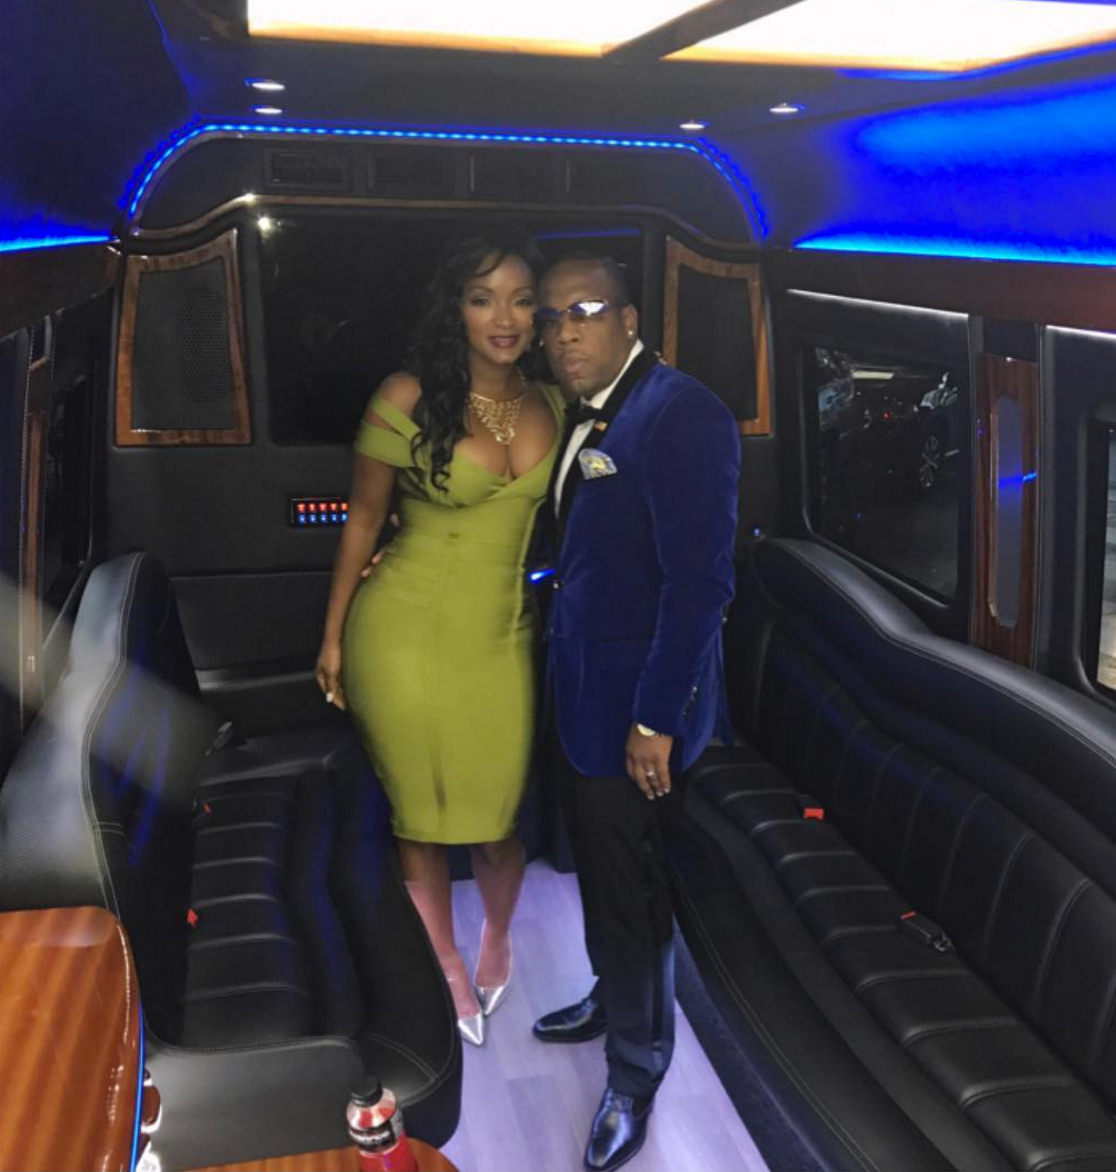 16 Photos Of New Edition's Michael Bivins And His Wife Teasha Looking So In Love
